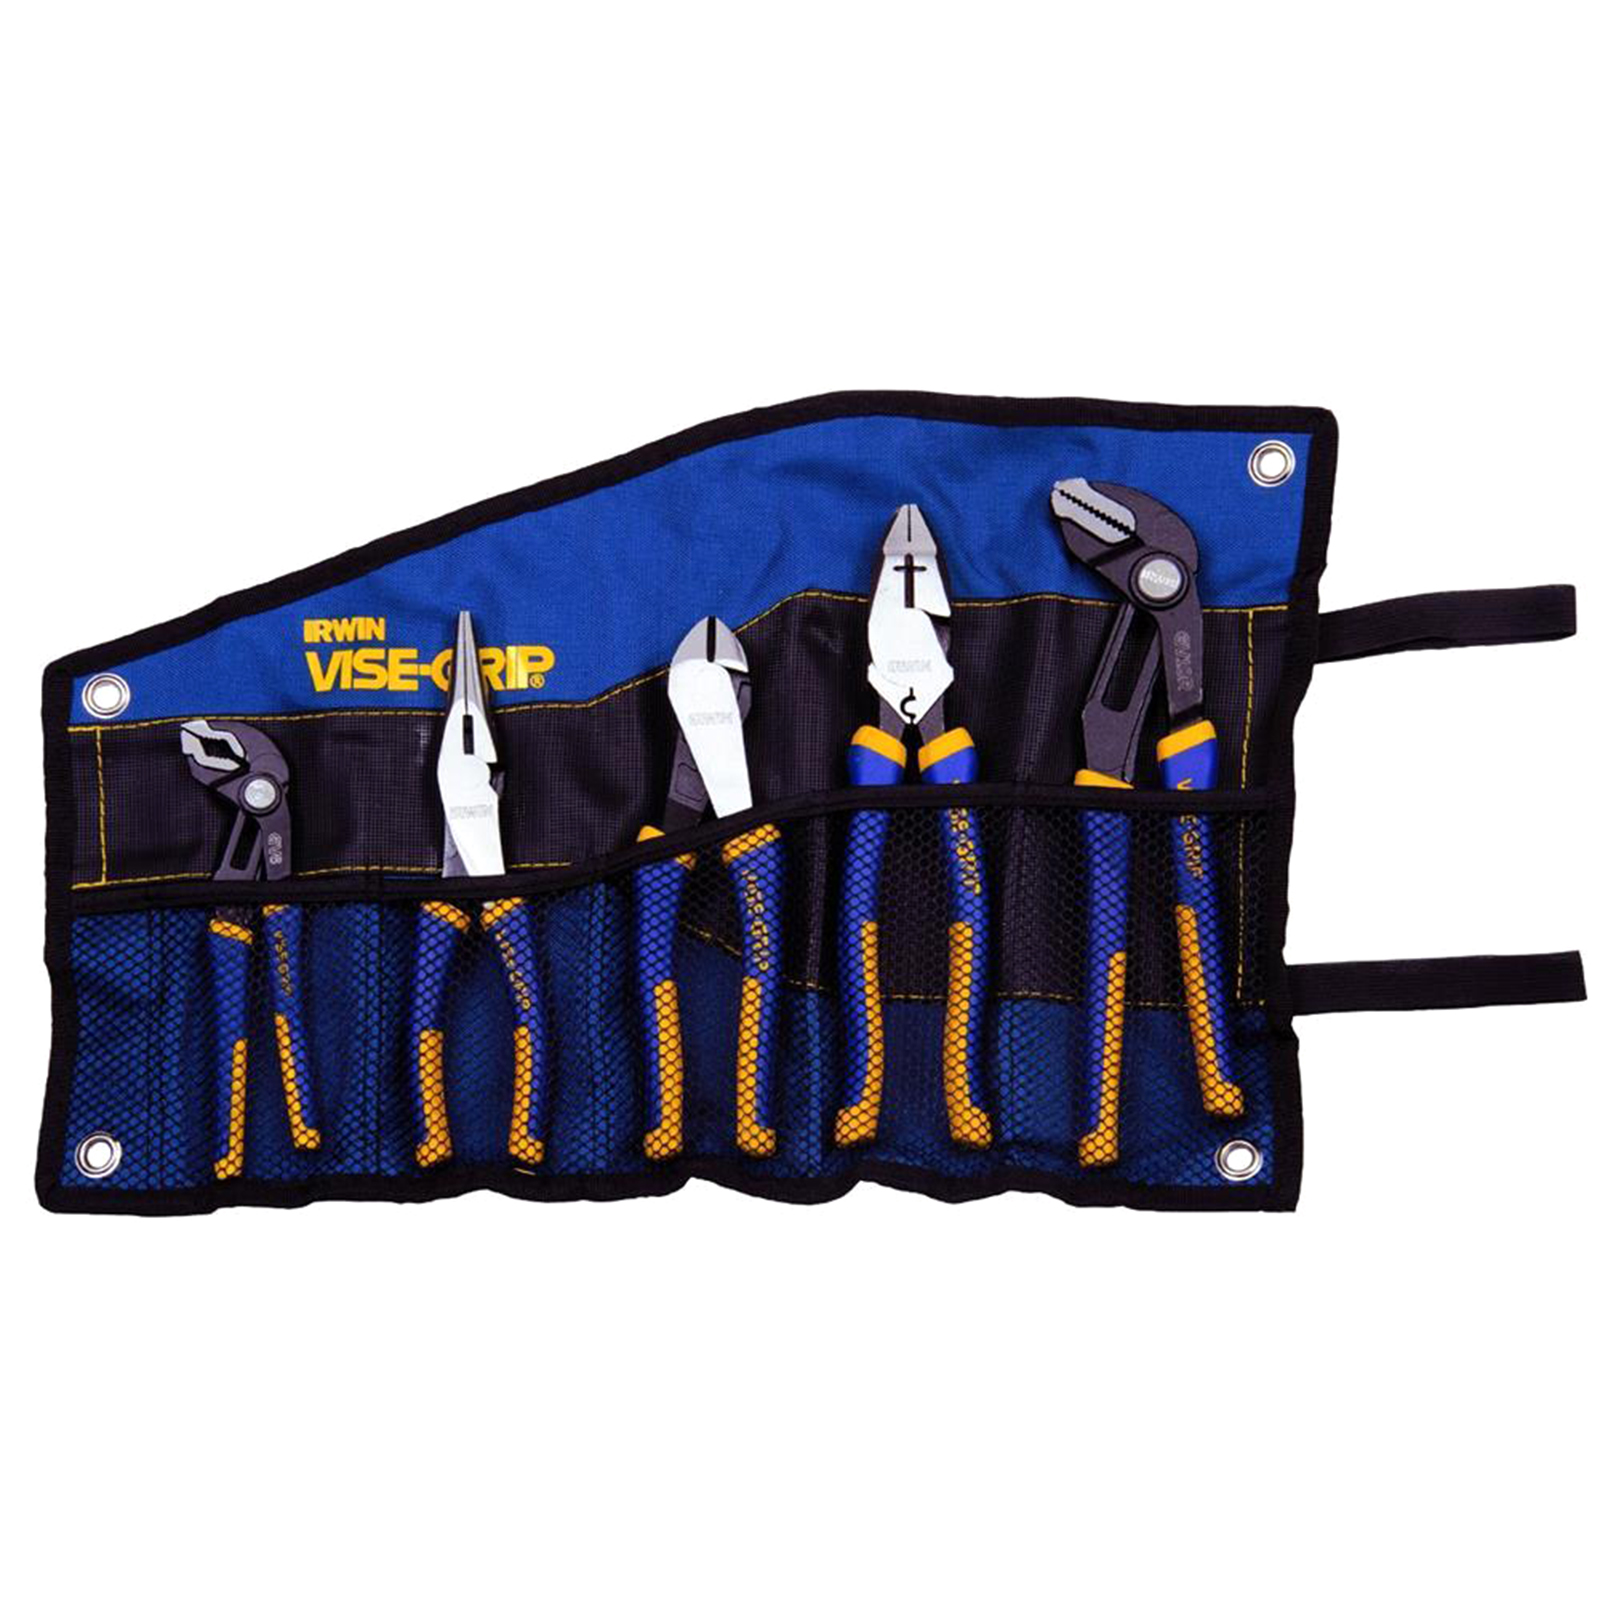 Vise Grip Vise-Grip 5pc. GrooveLock Traditional Pliers Set with Roll Up Bag